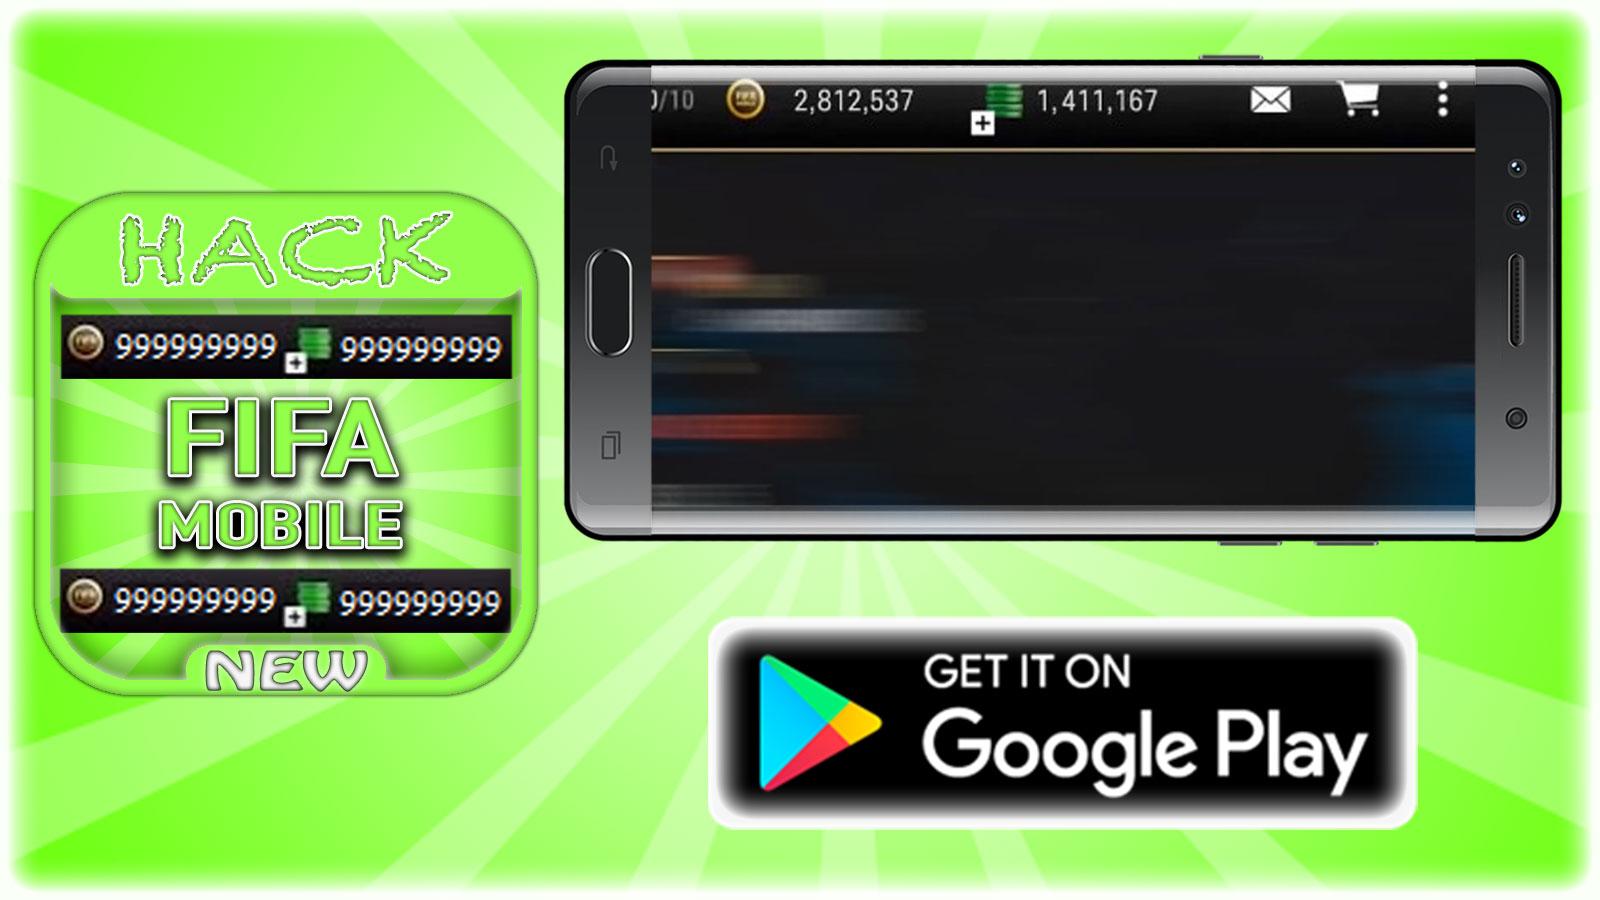 Hack For Fifa Mobile Game App Joke - Prank. for Android ... - 